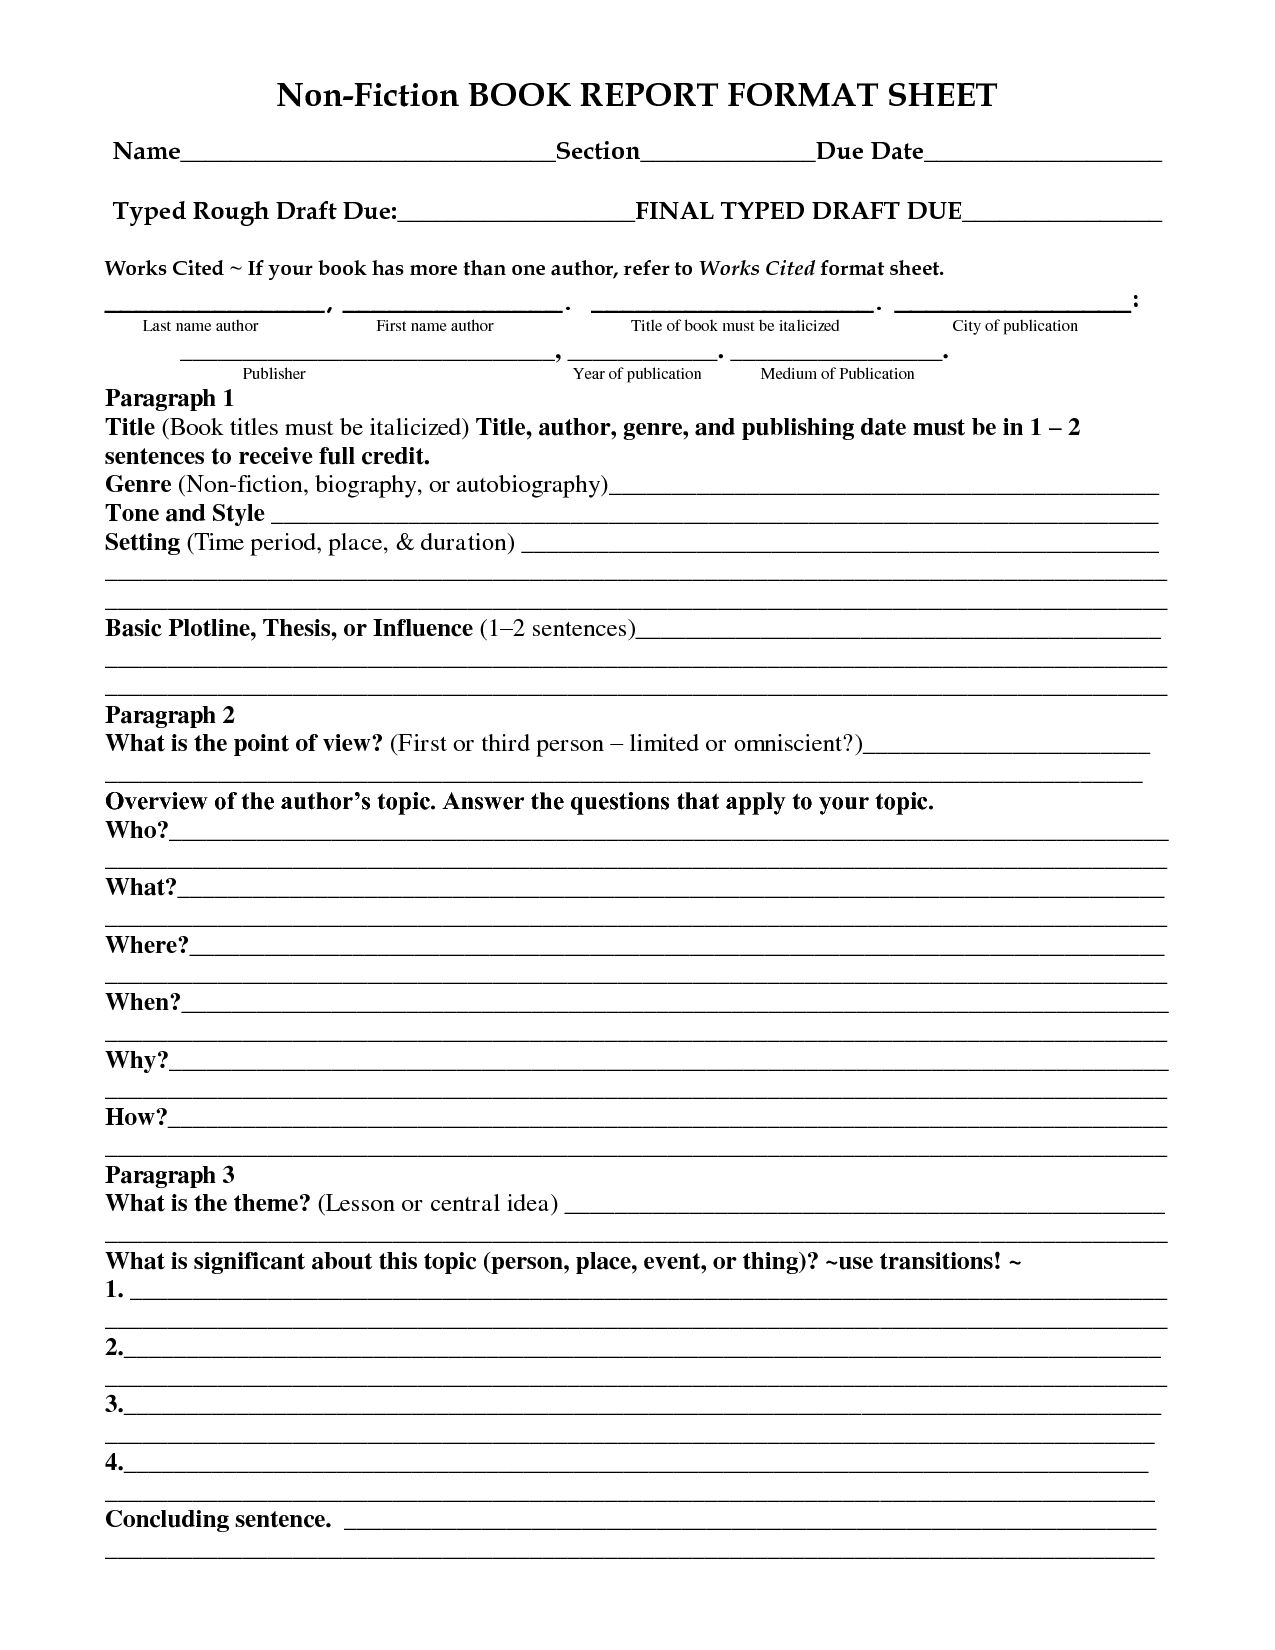 28 Images Of 5Th Grade Non Fiction Book Report Template Inside Nonfiction Book Report Template